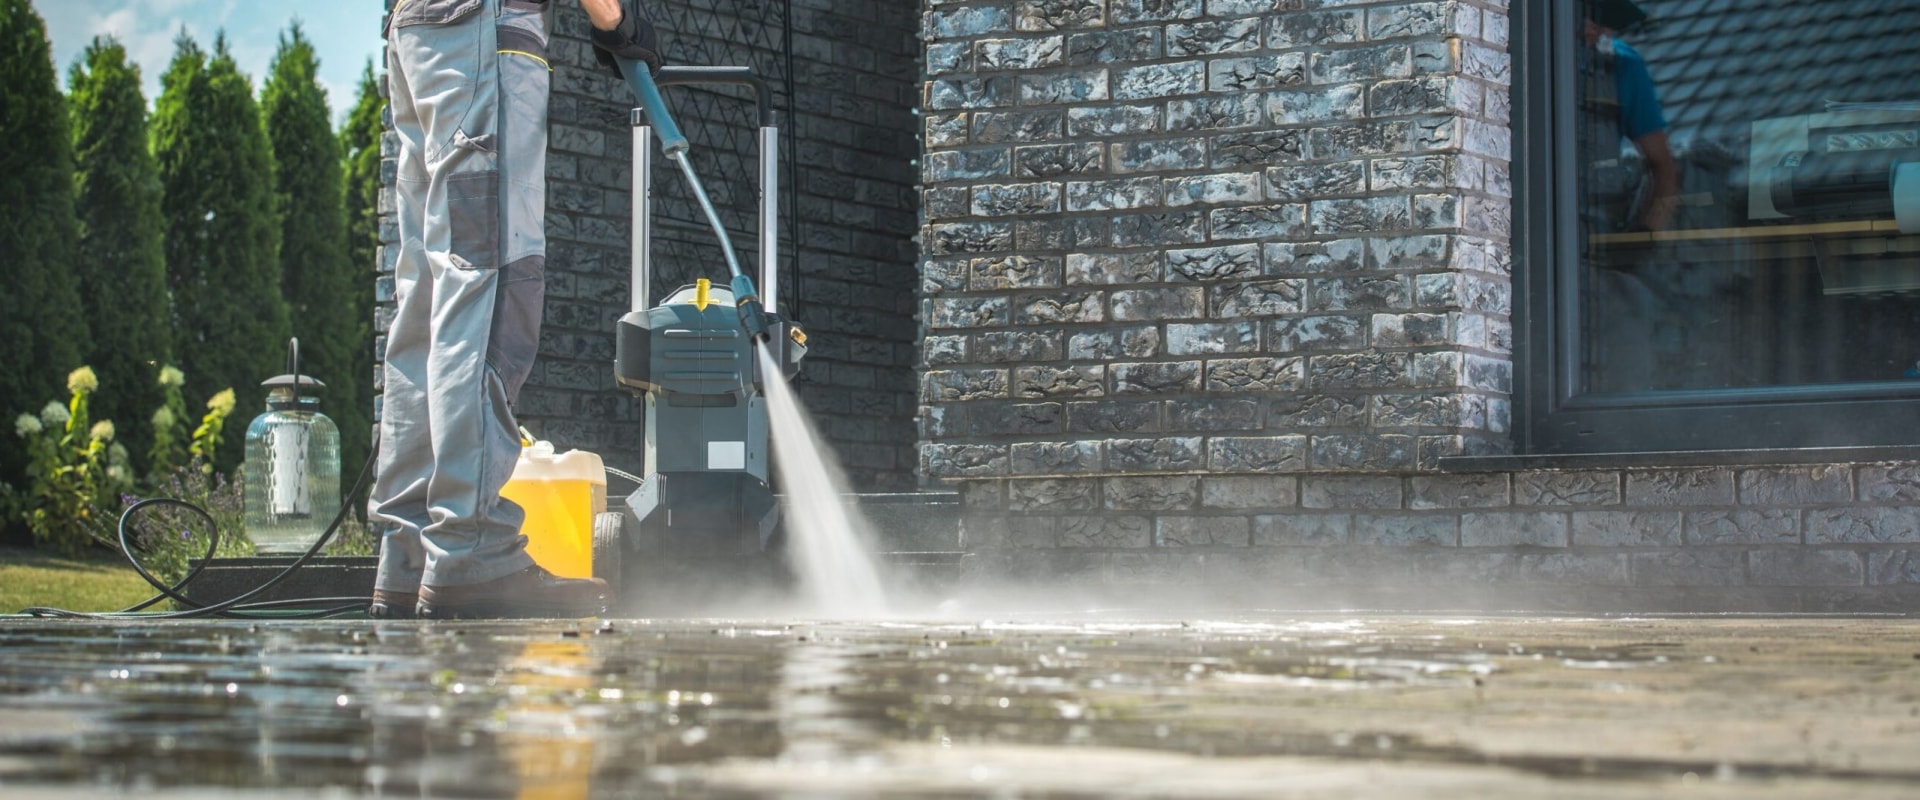 How often should a pressure washer be serviced?